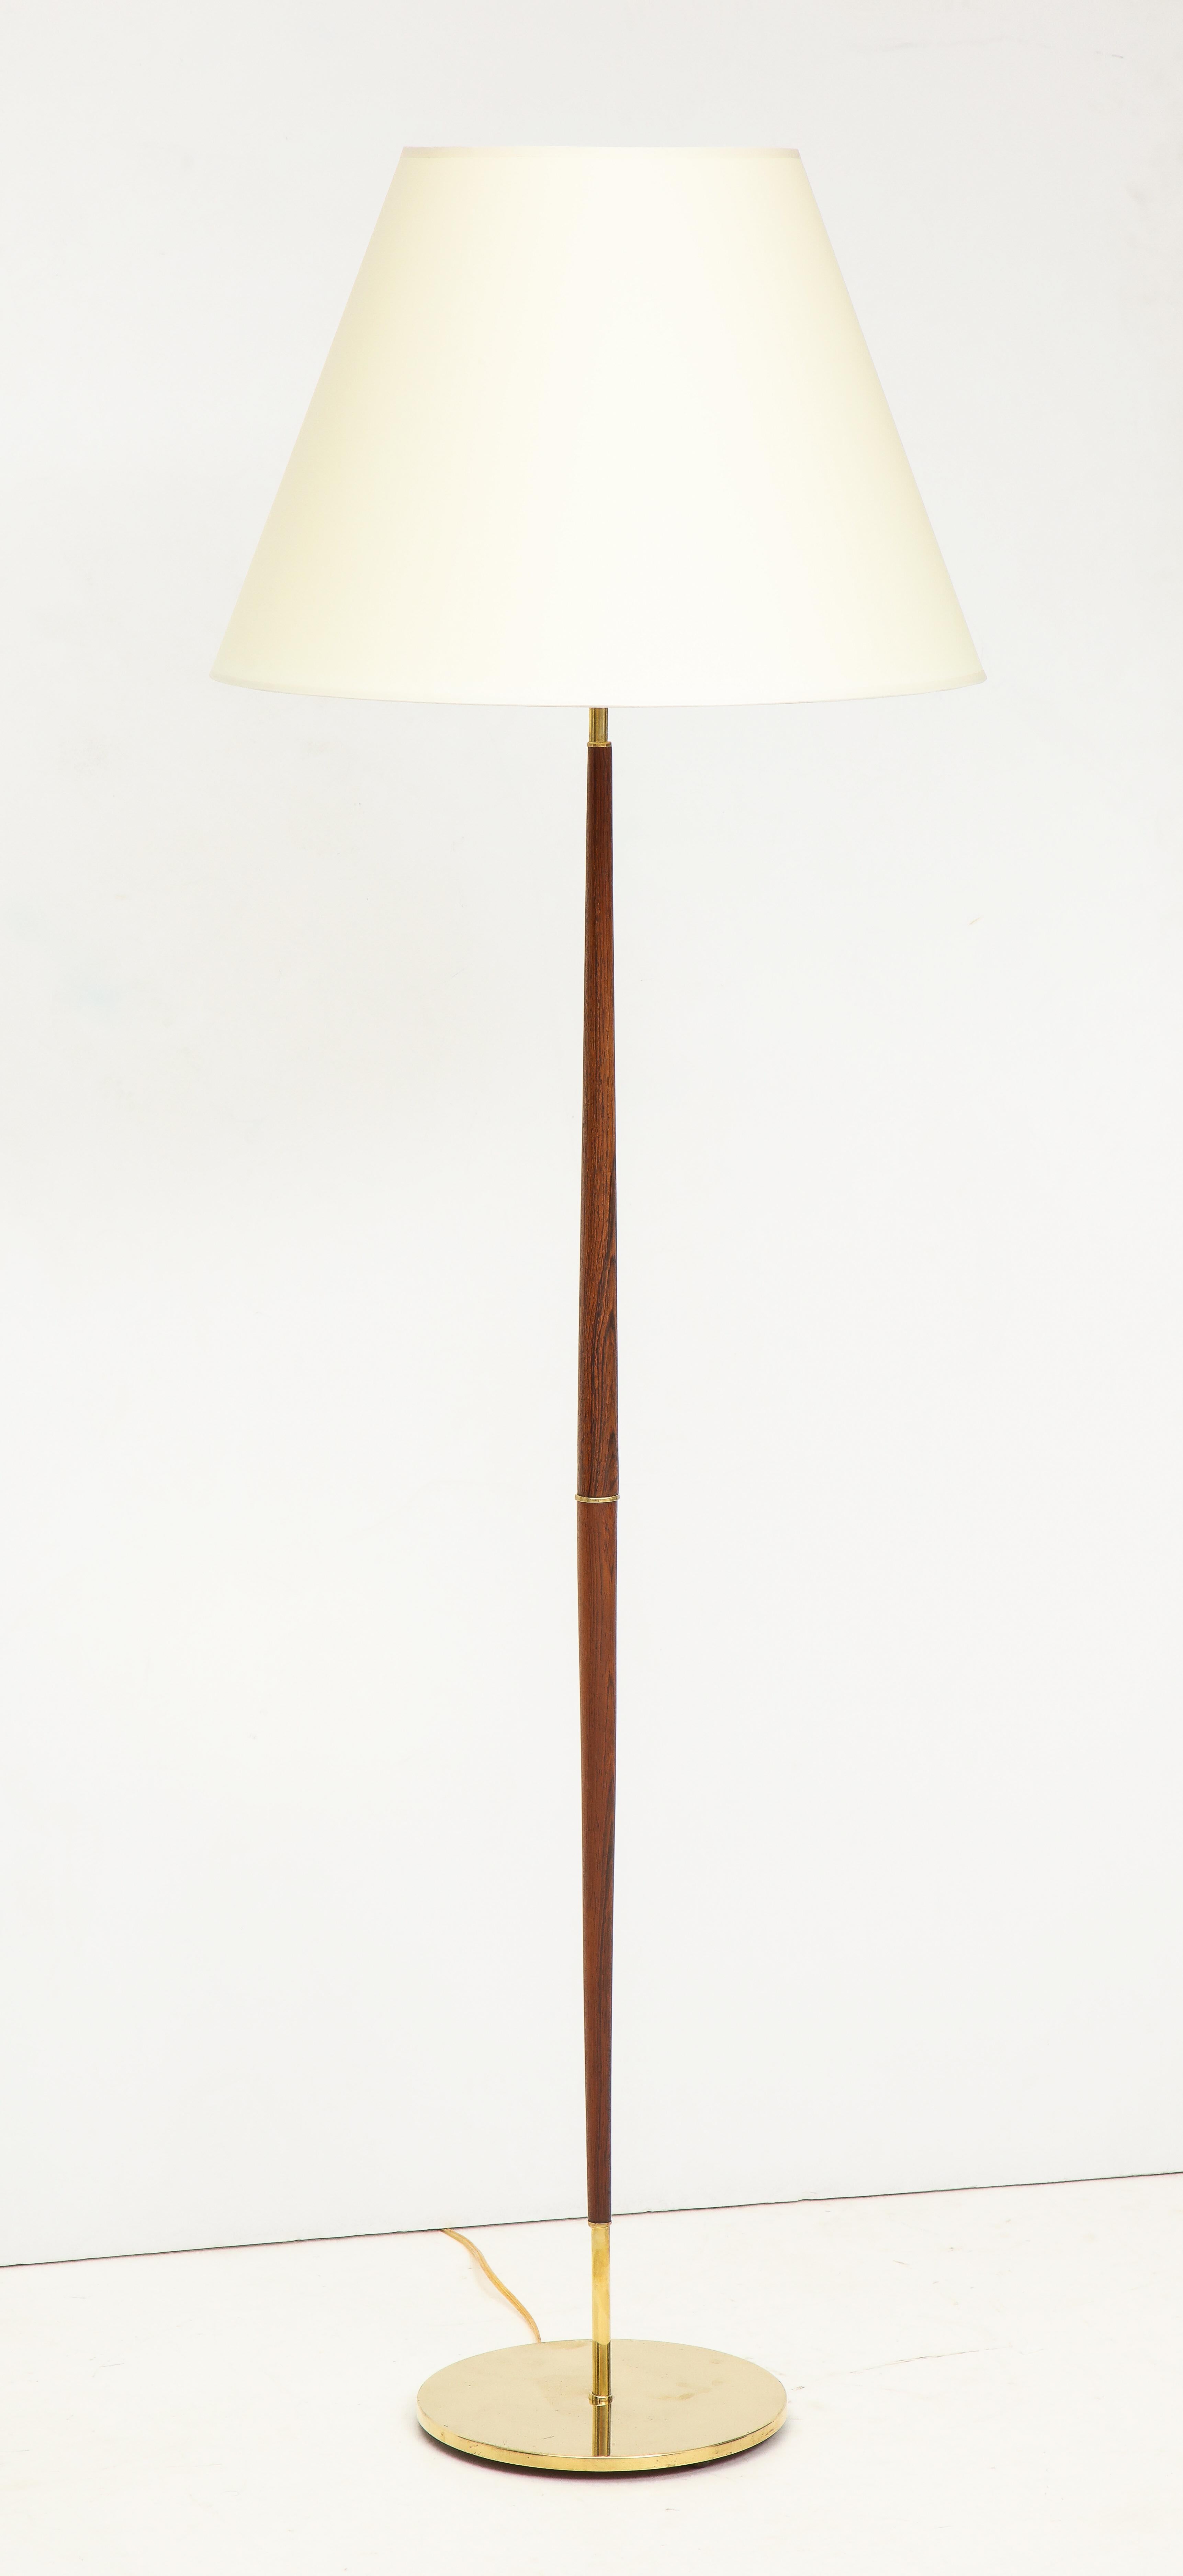 A Danish rosewood and brass floor lamp, with a spreading and tapered stem, circa 1960s, probably Fog & Mørup. Rewire for the USA. New shade. (19.75in.- diameter).